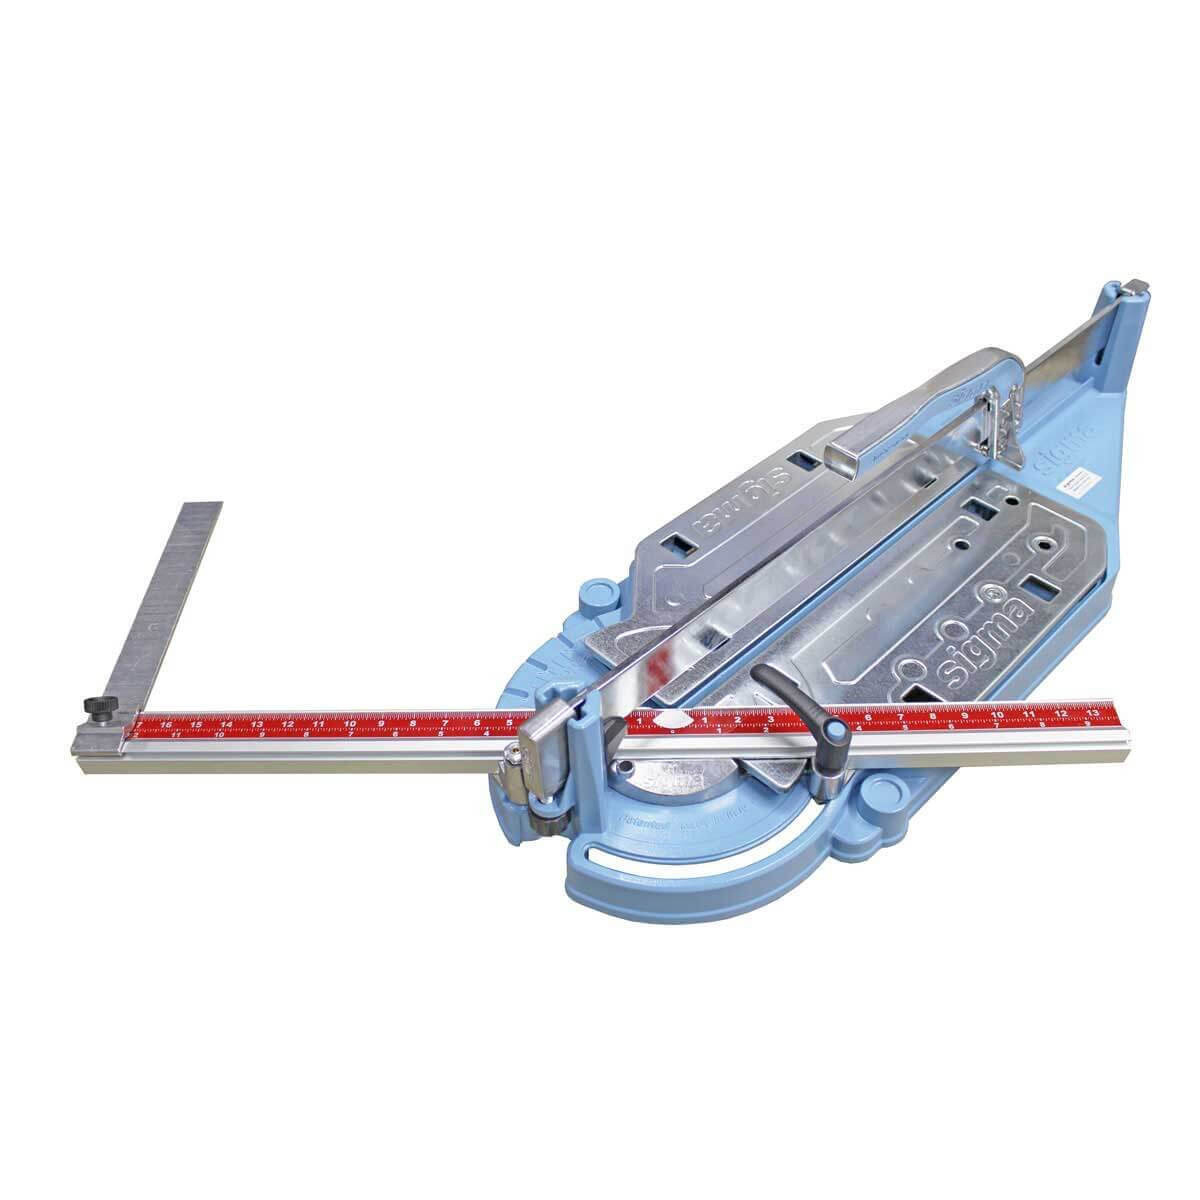 Sigma 3C2 30" Tile Cutter - Tile This